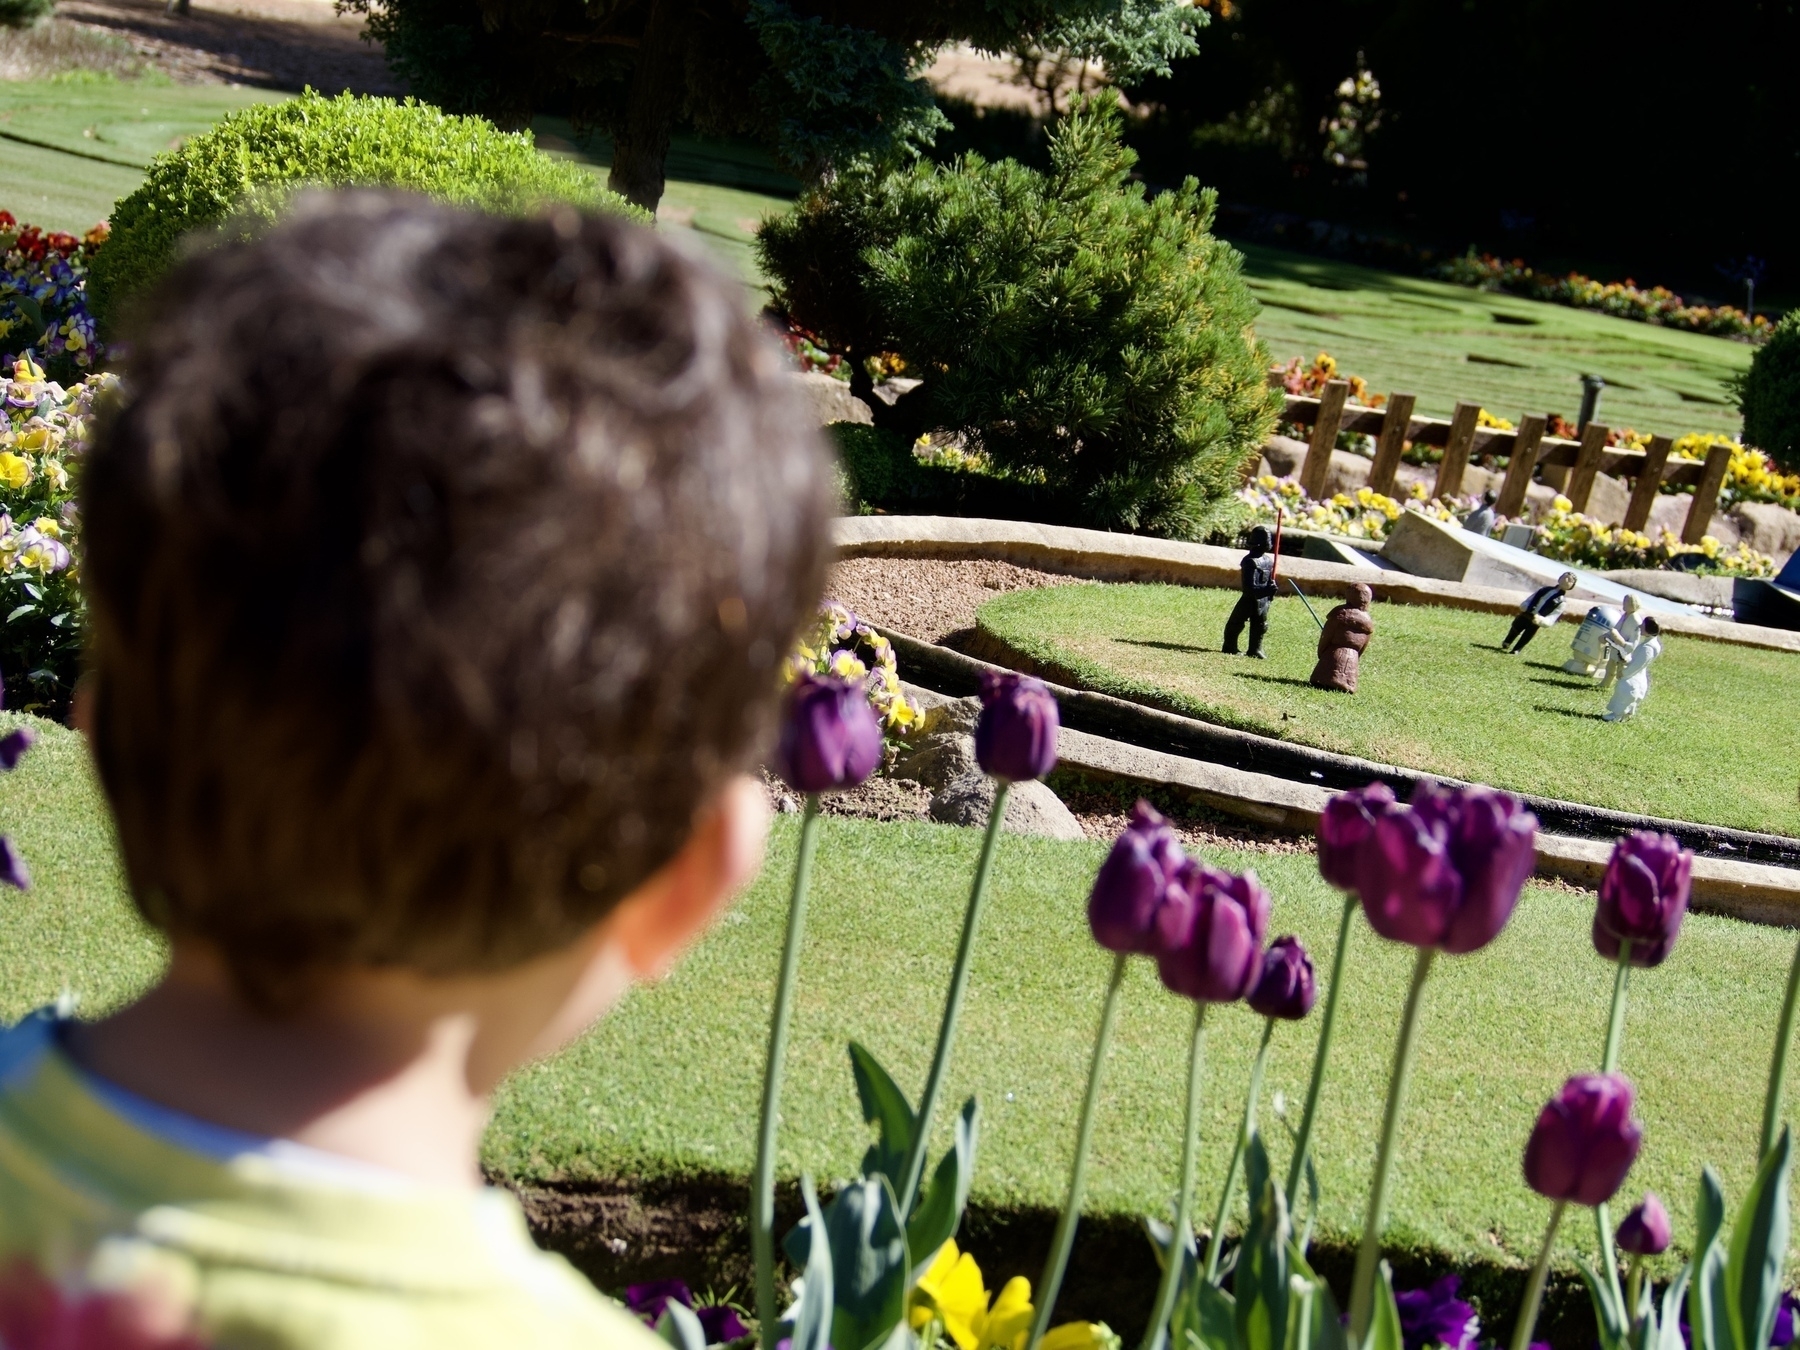 Looking over a toddler’s shoulder, past tulips towards little Star Wars figurines on very finely mown lawn